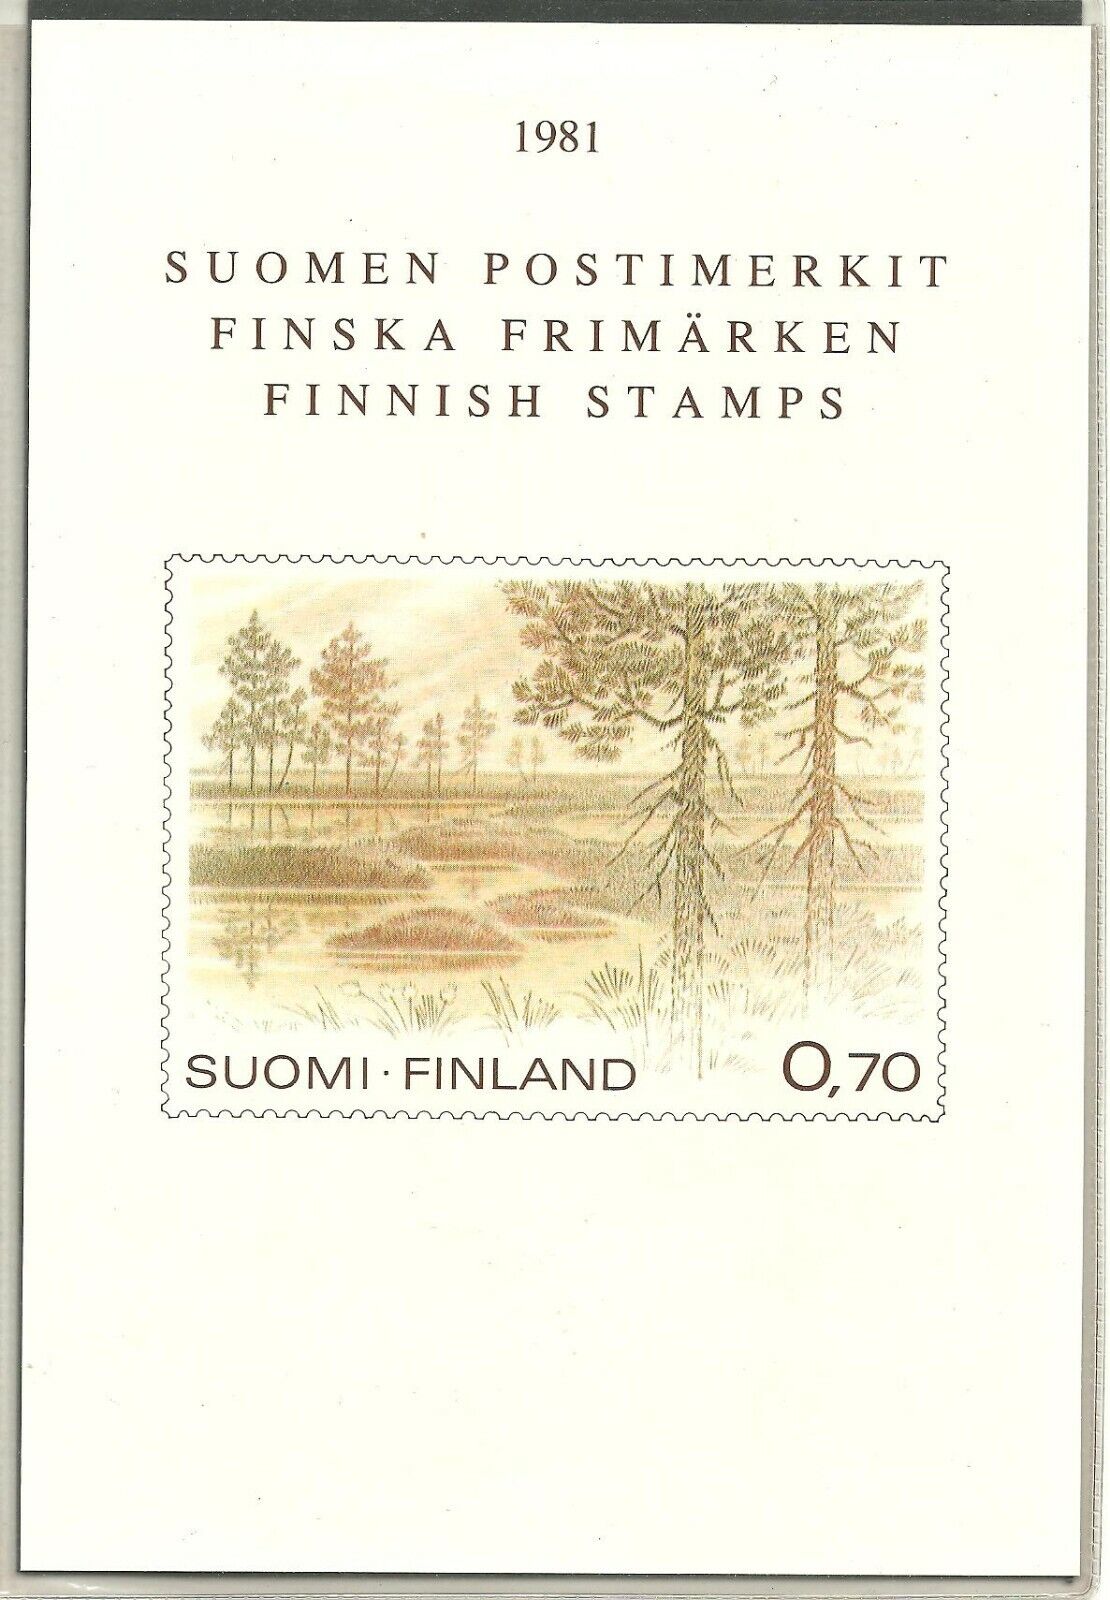 FINLAND stamps - Official Year Set 1981 MNH (2 scans)